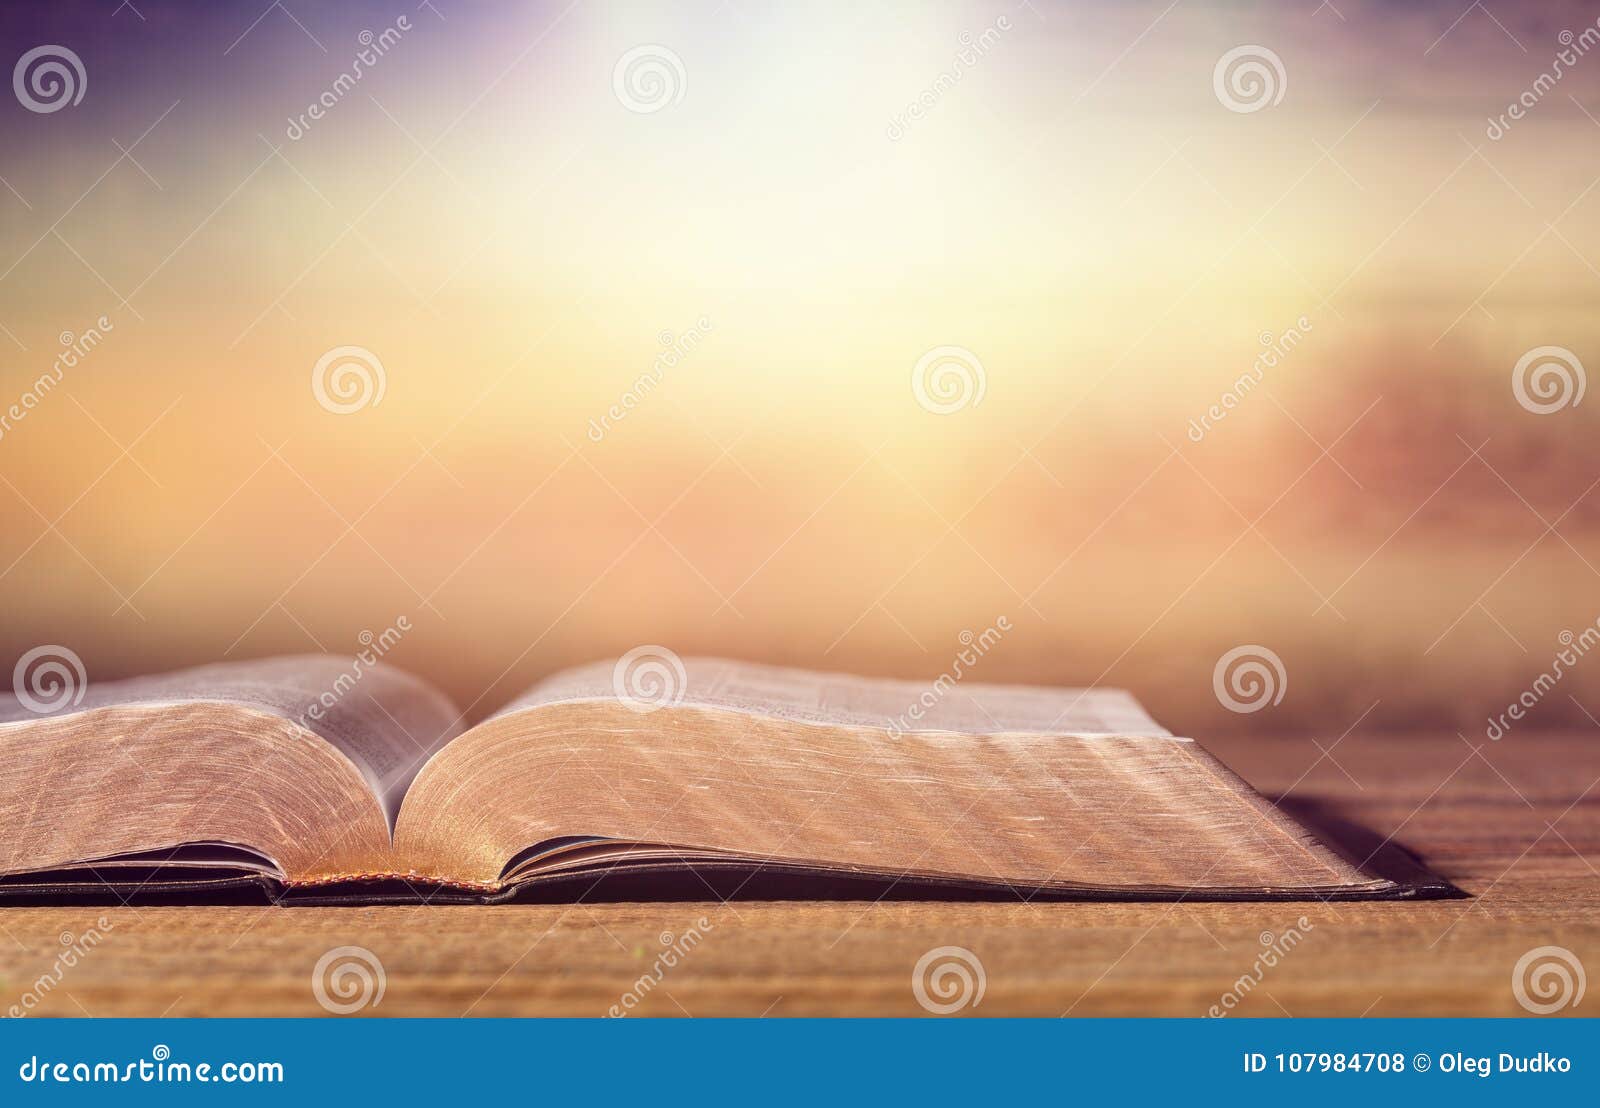 open holy bible book on background